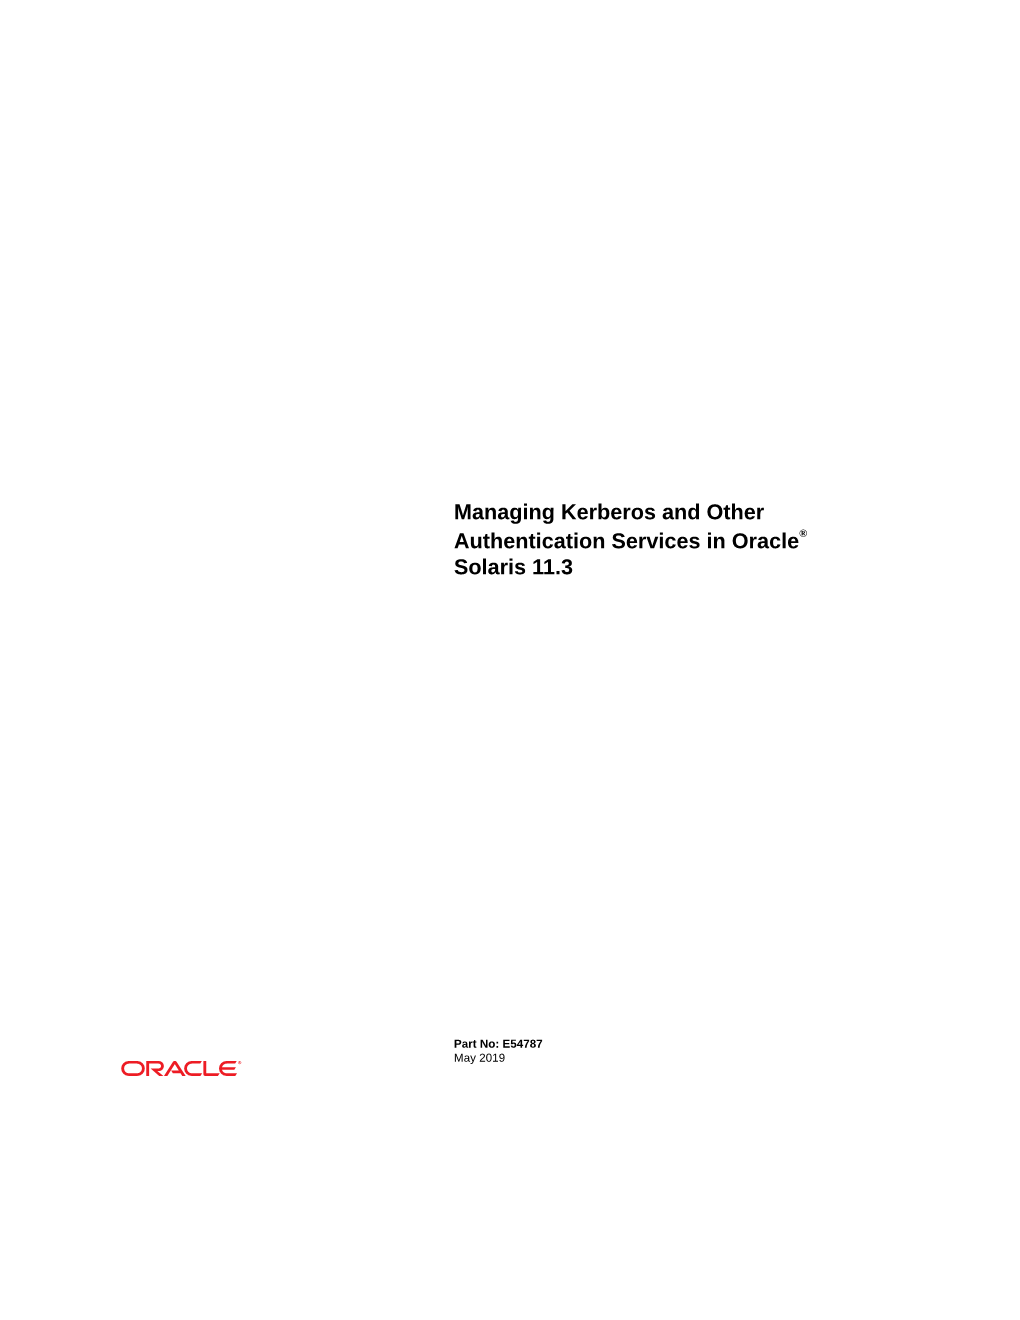 Managing Kerberos and Other Authentication Services in Oracle Solaris 11.3 Part No: E54787 Copyright © 2002, 2019, Oracle And/Or Its Affiliates